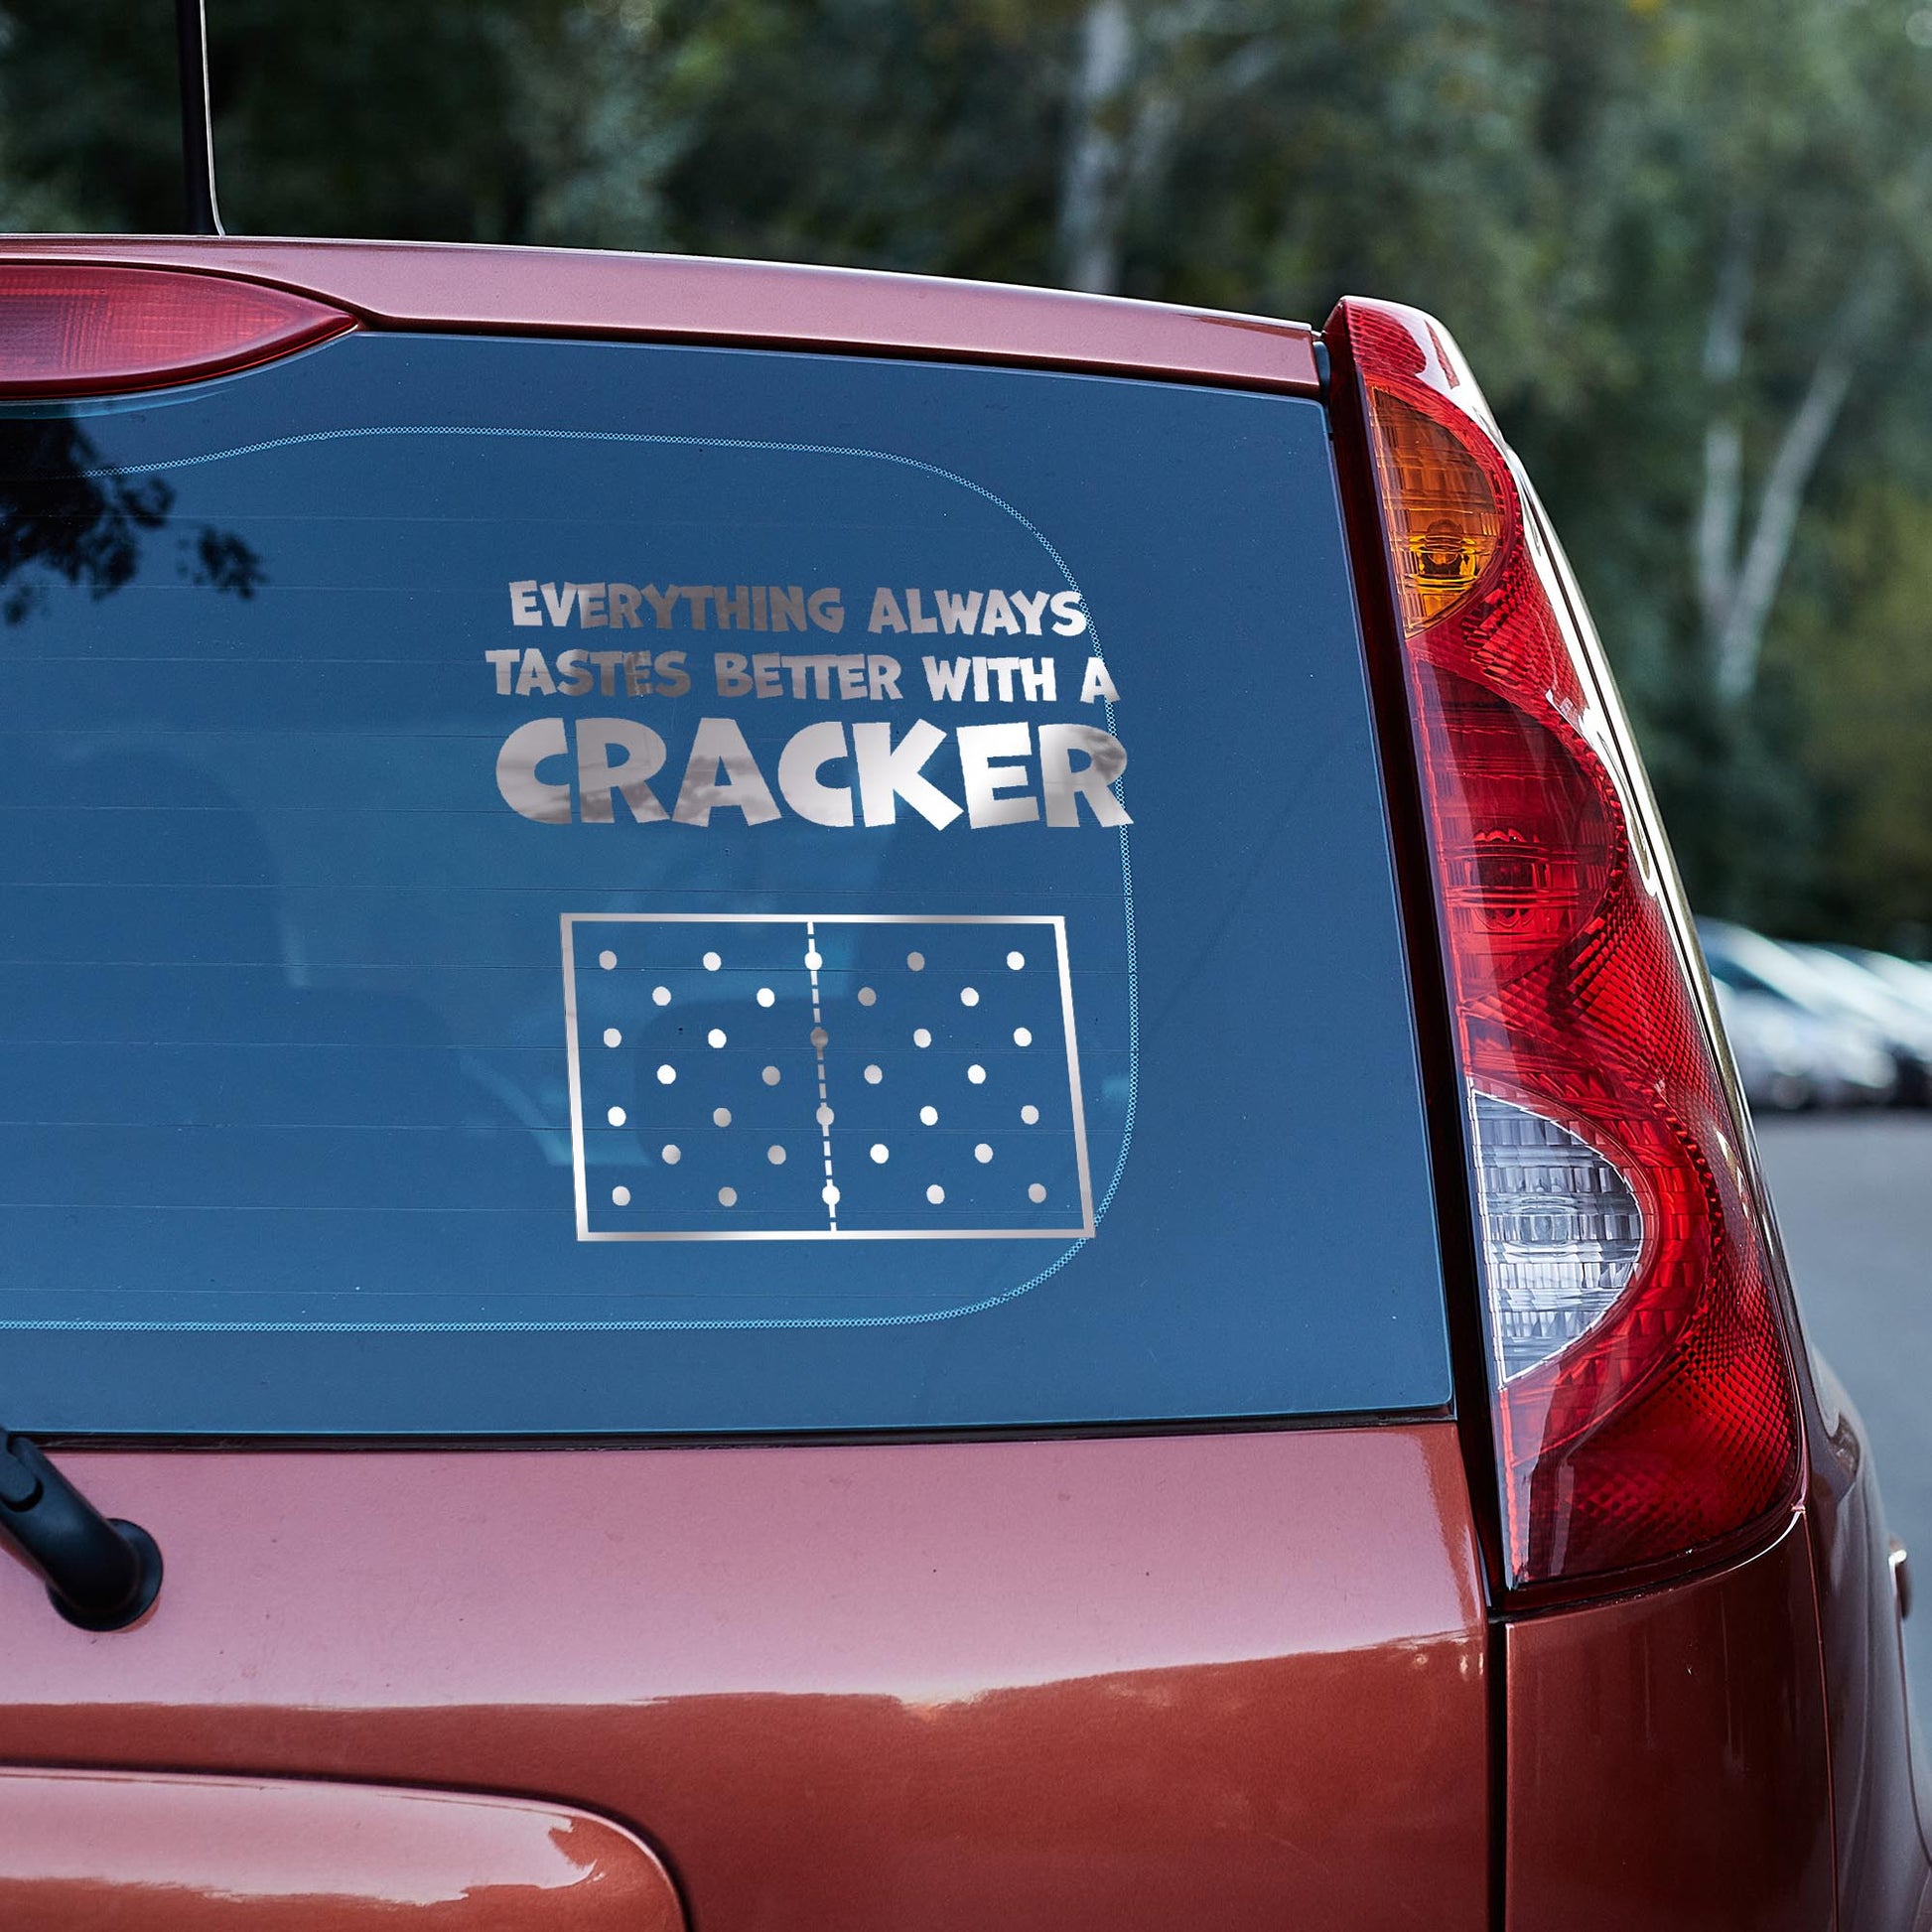 Everything always tastes better with a cracker vinyl decal car decal decal for cars decal for trucks Decals for cars Decals for Trucks decals for tumblers decals for vehicles door decal funny decals Window decals